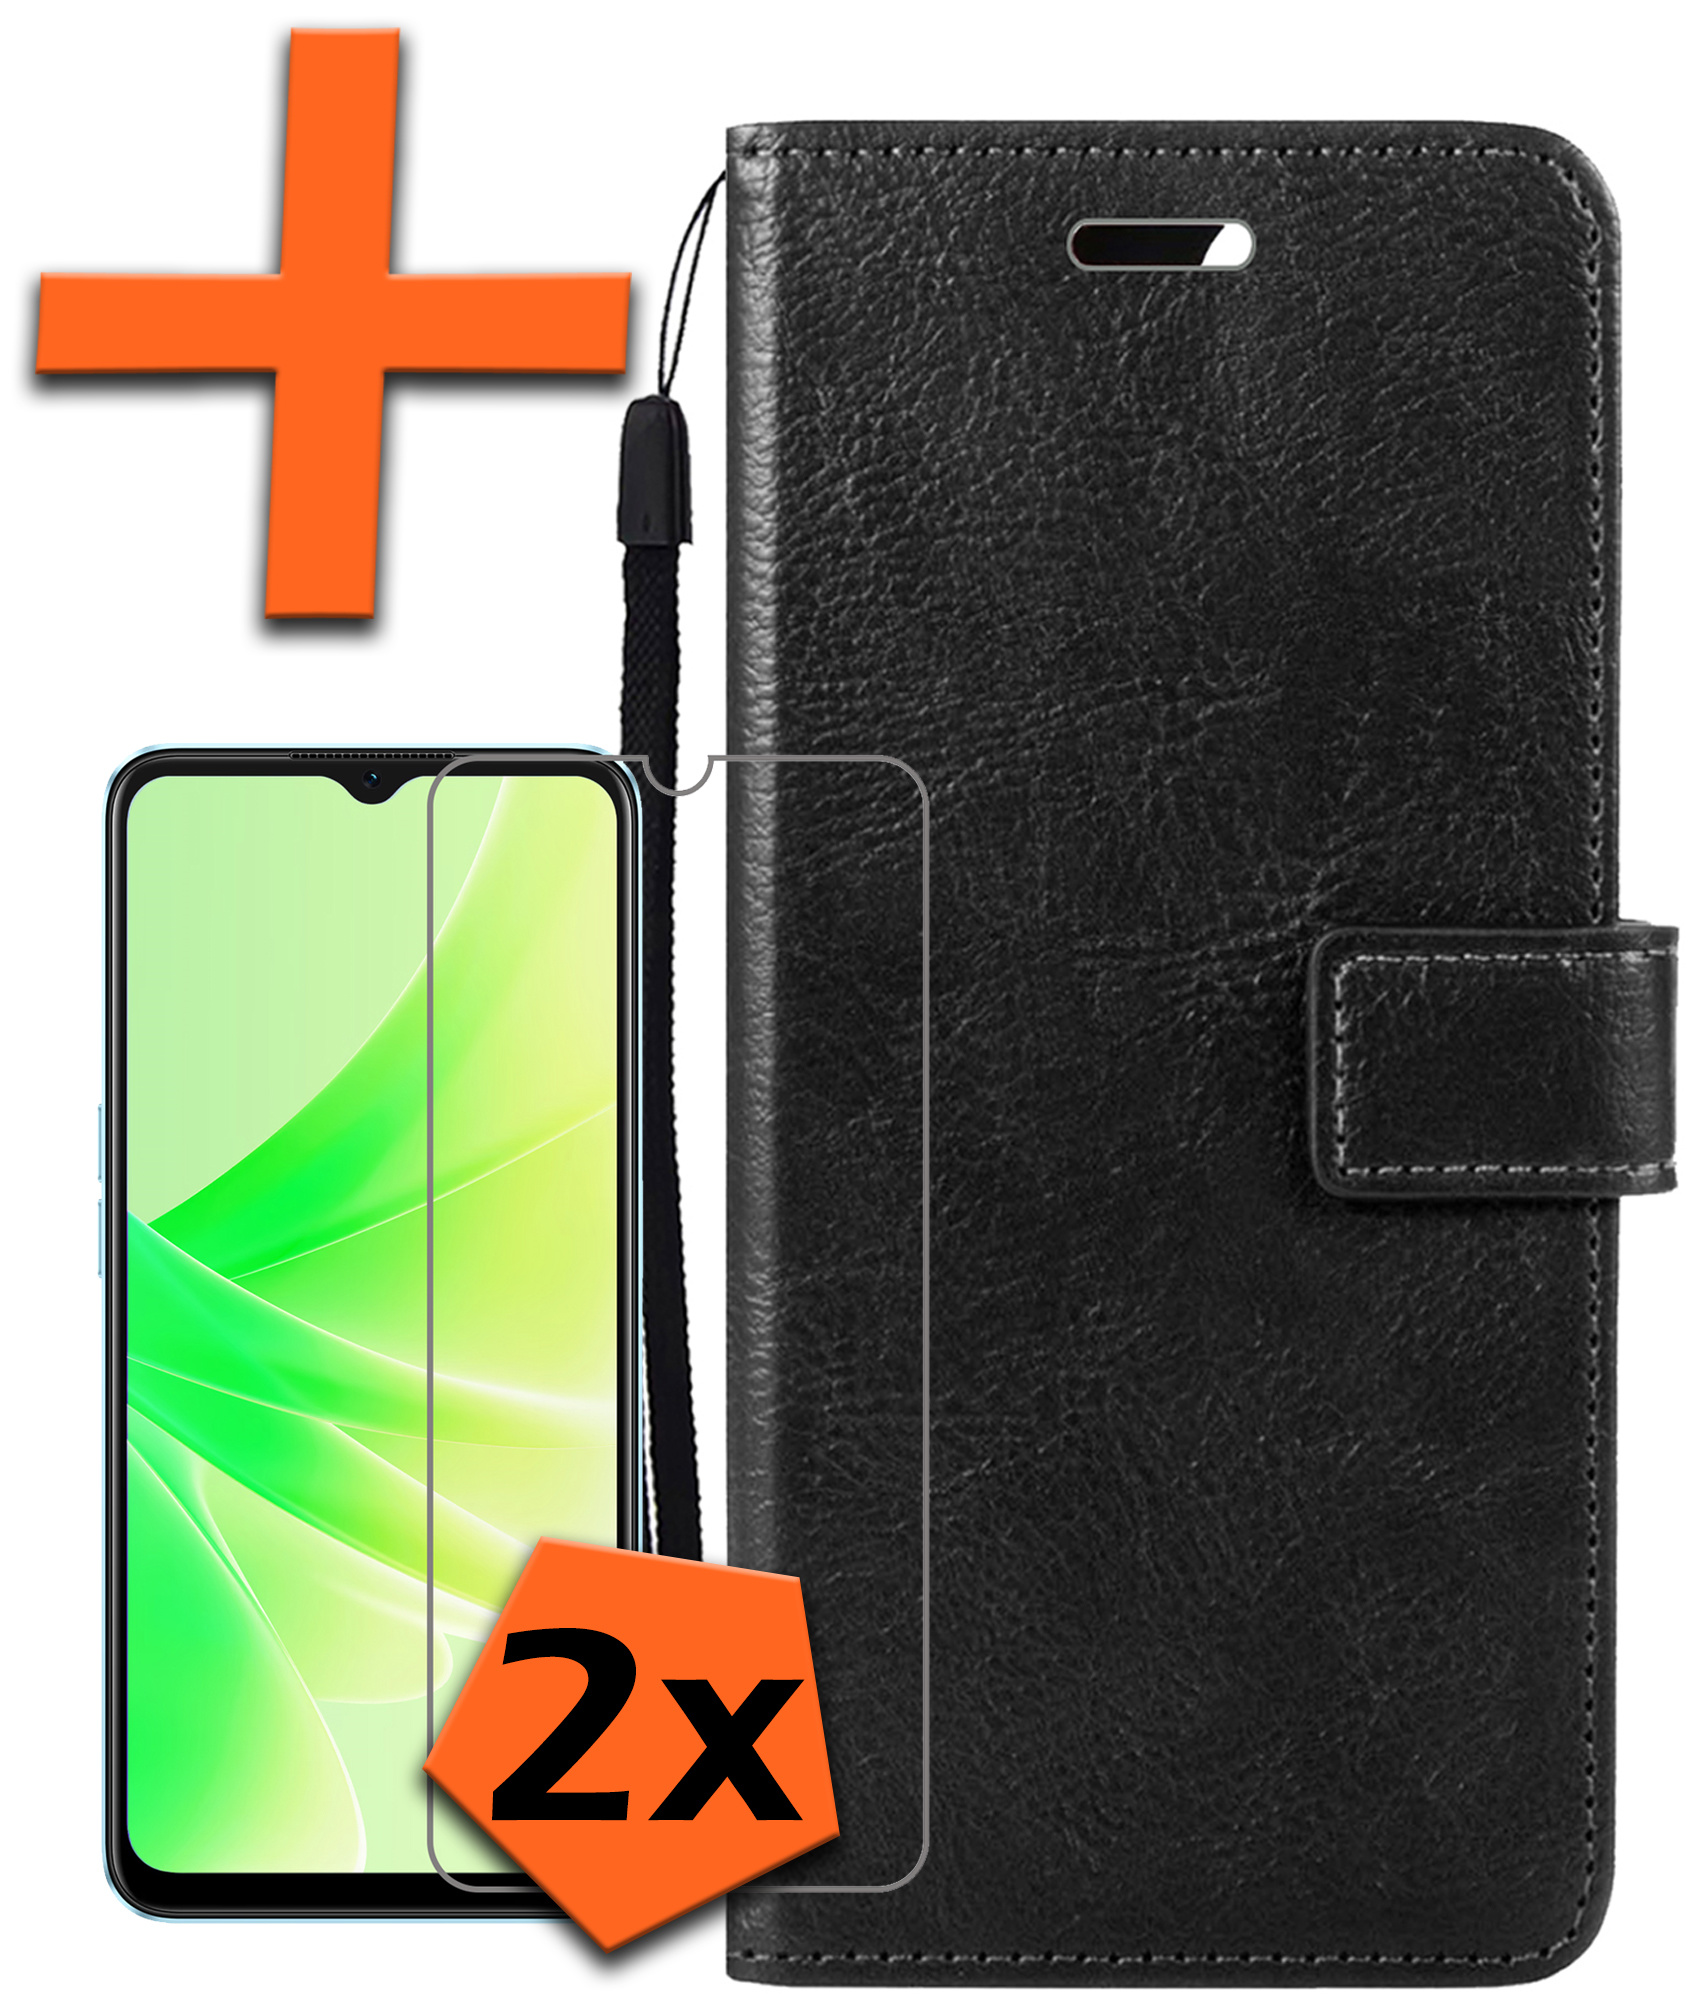 OPPO A57s Hoes Bookcase Flipcase Book Cover Met 2x Screenprotector - OPPO A57s Hoesje Book Case - Zwart